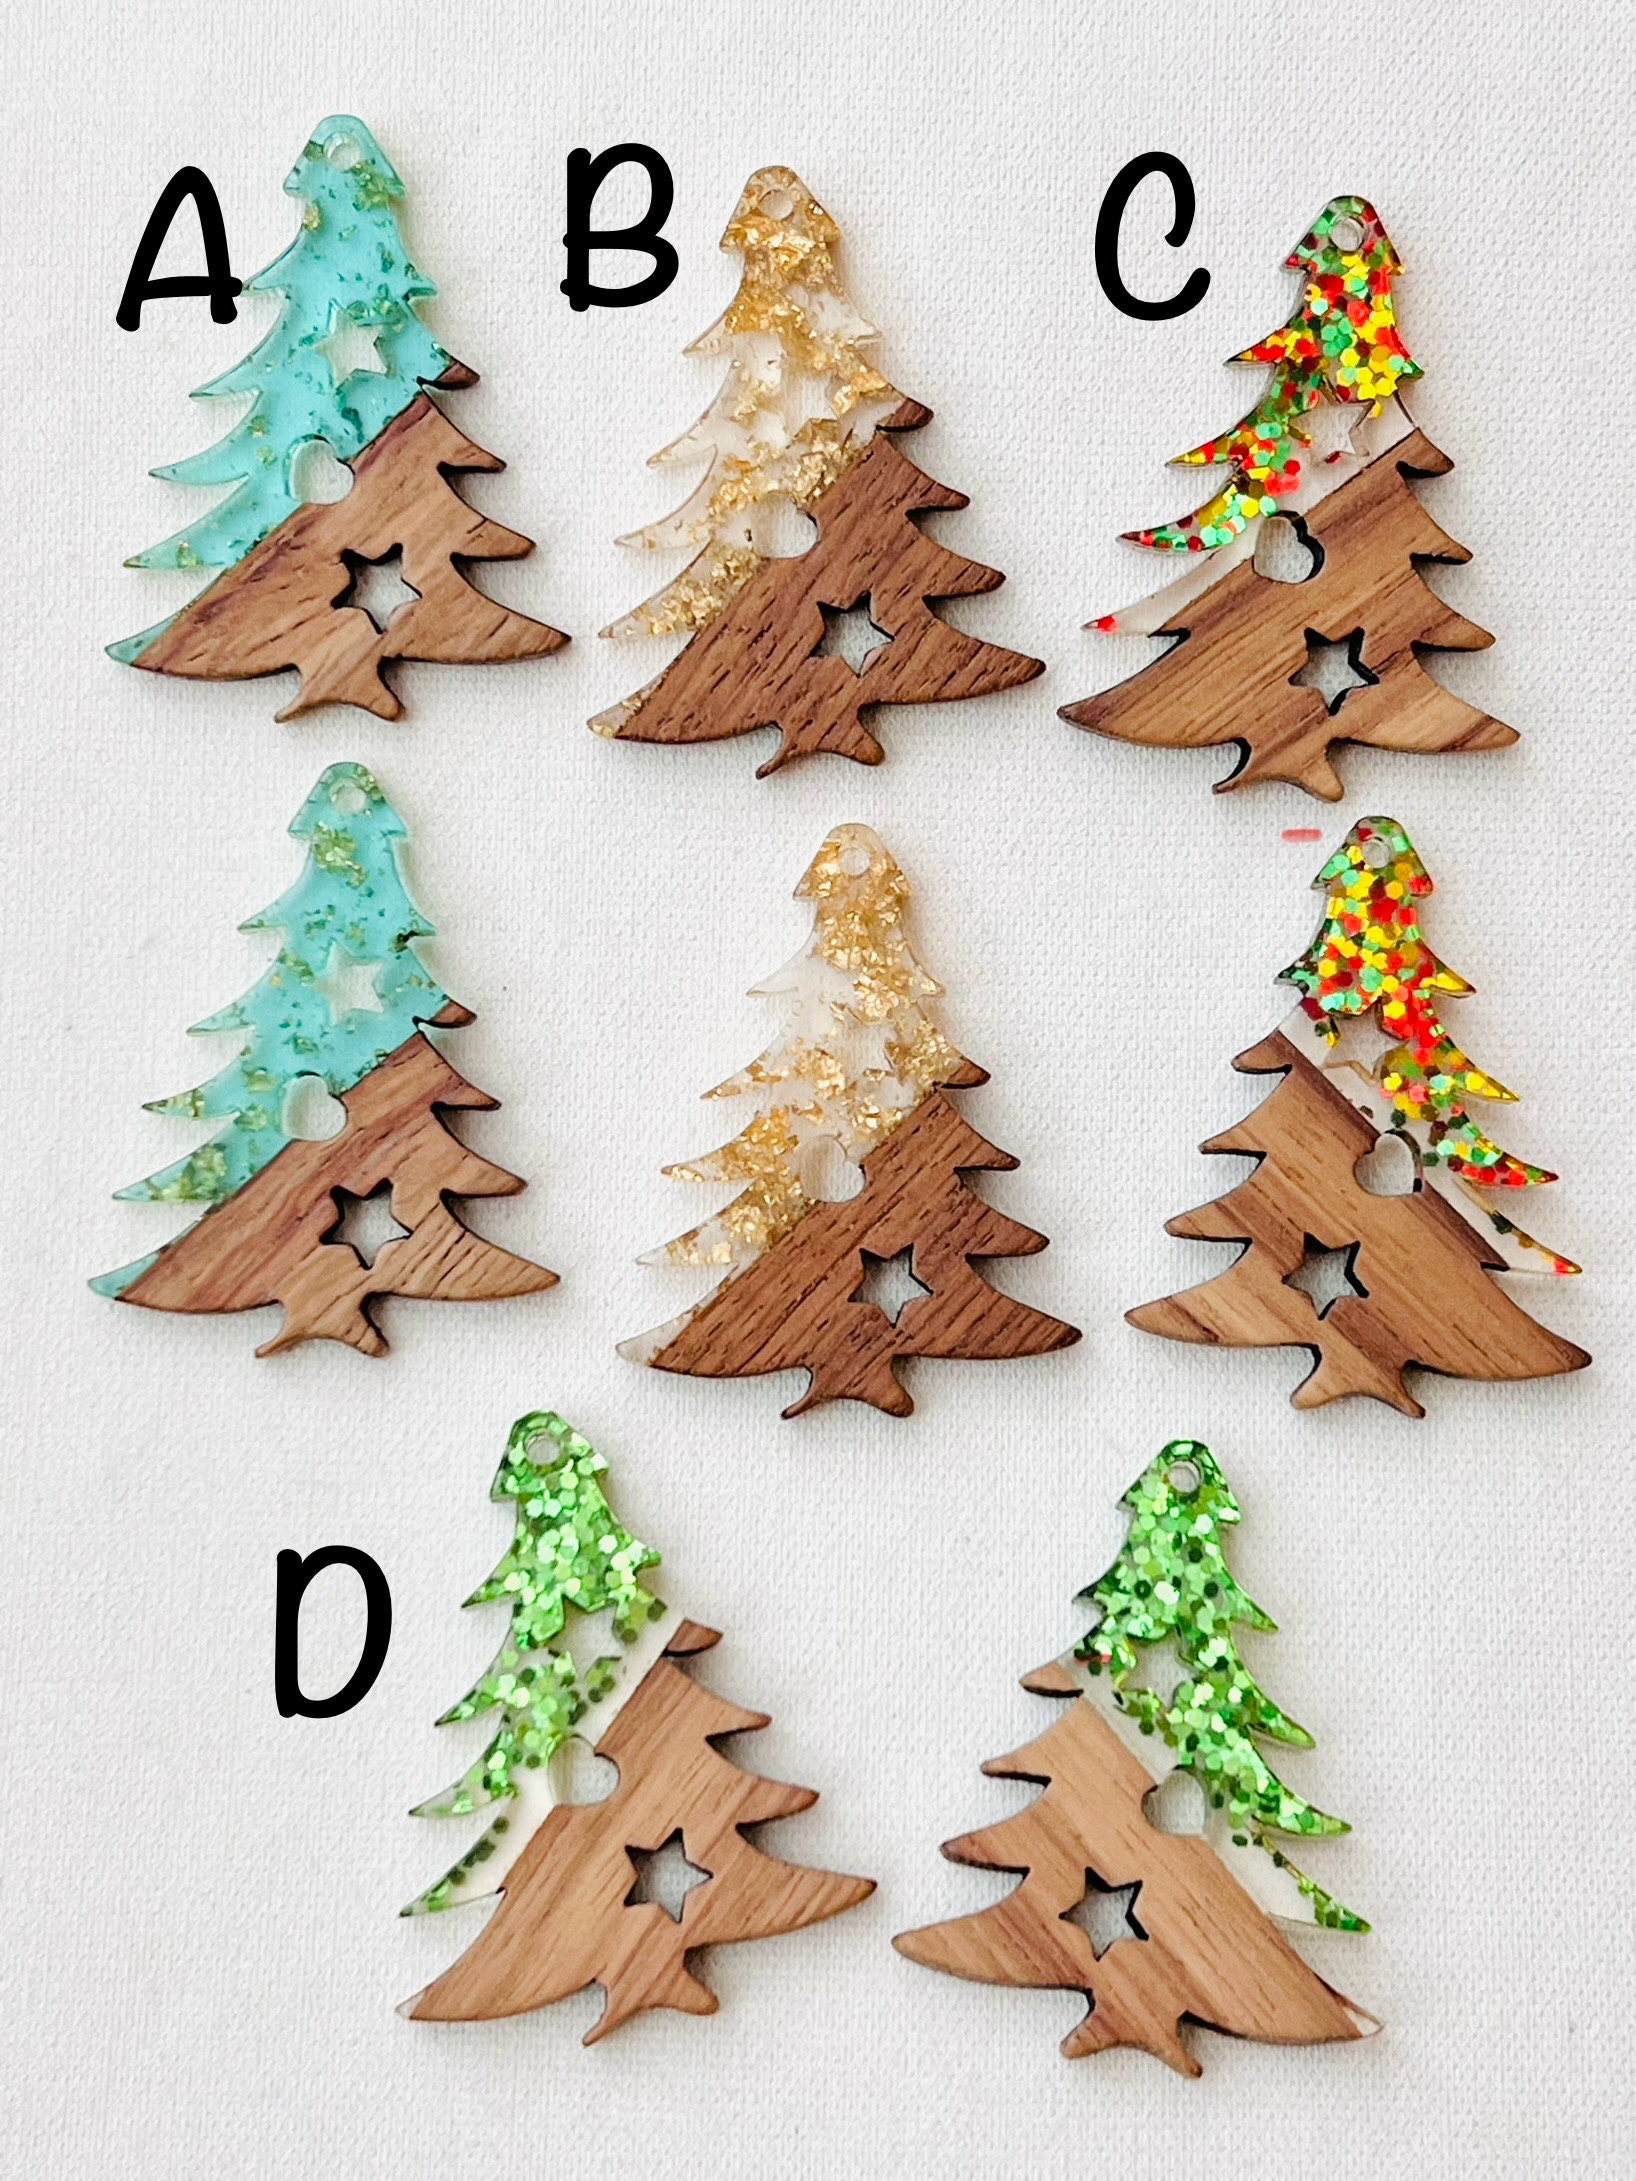 4 Resin & Wood 38mm or 1.5” Christmas Pine Tree Beads Charms with Connector  Loop Hole Earring Findings Jewelry Making Craft